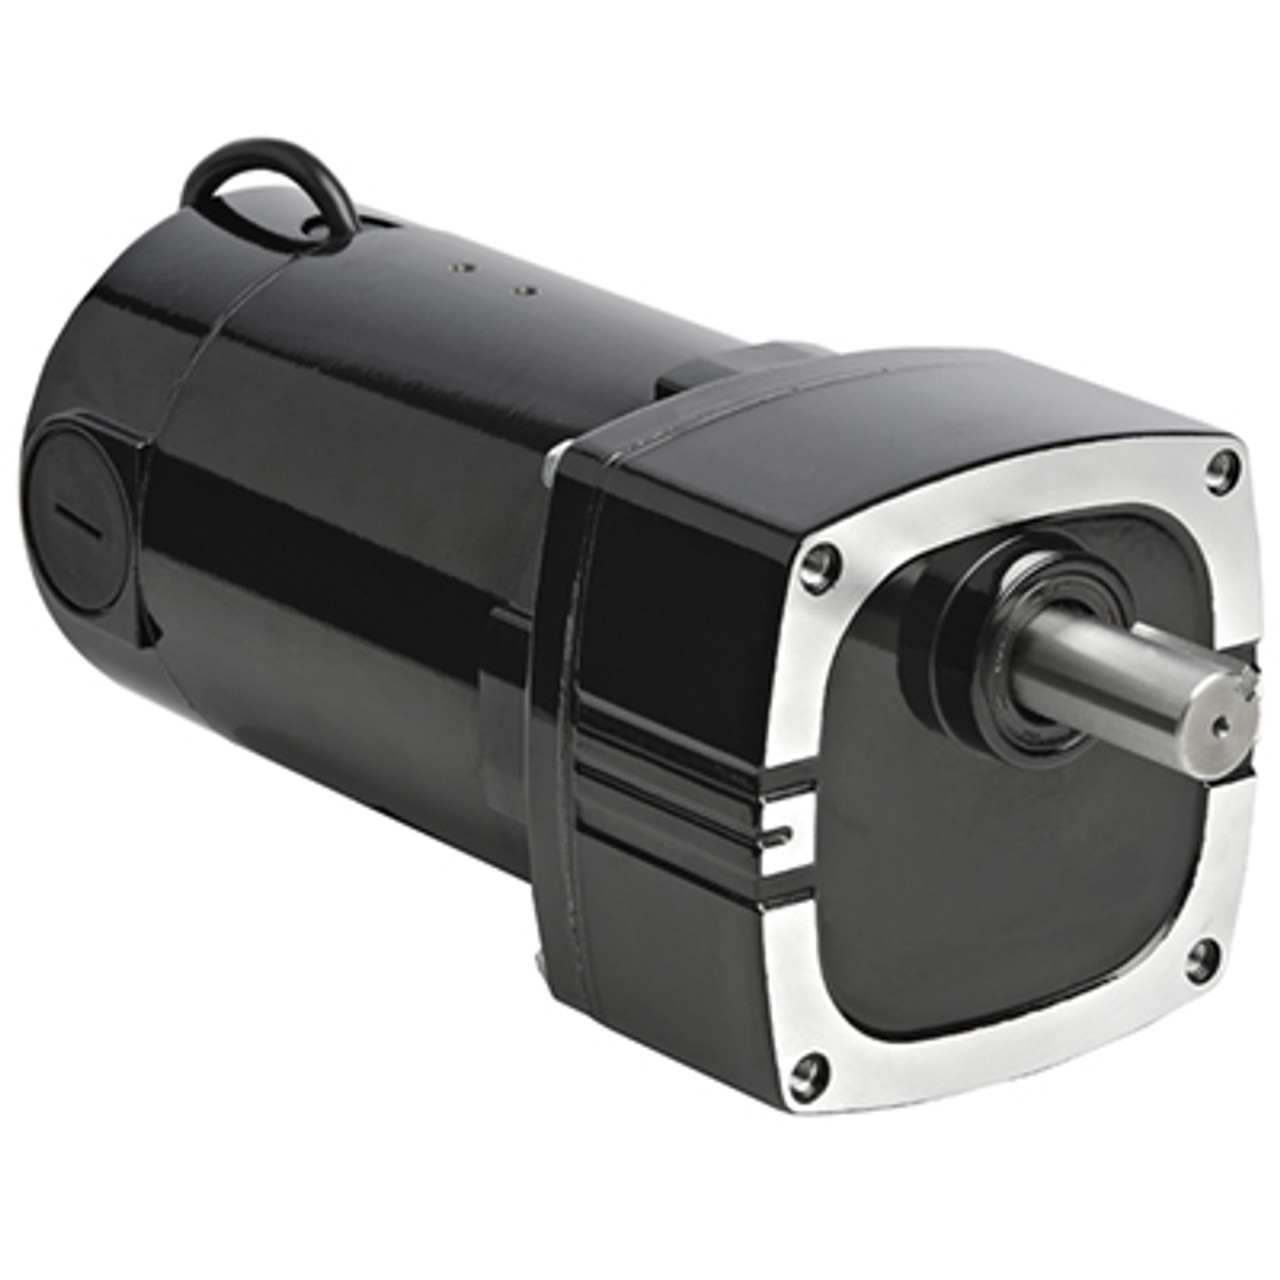 1503, 42A5BEPM-FX2, 1/4 HP, 167 RPM, 73 Lb-in, 15:1, 90 Vdc, Parallel Shaft  SCR Rated DC Gearmotor